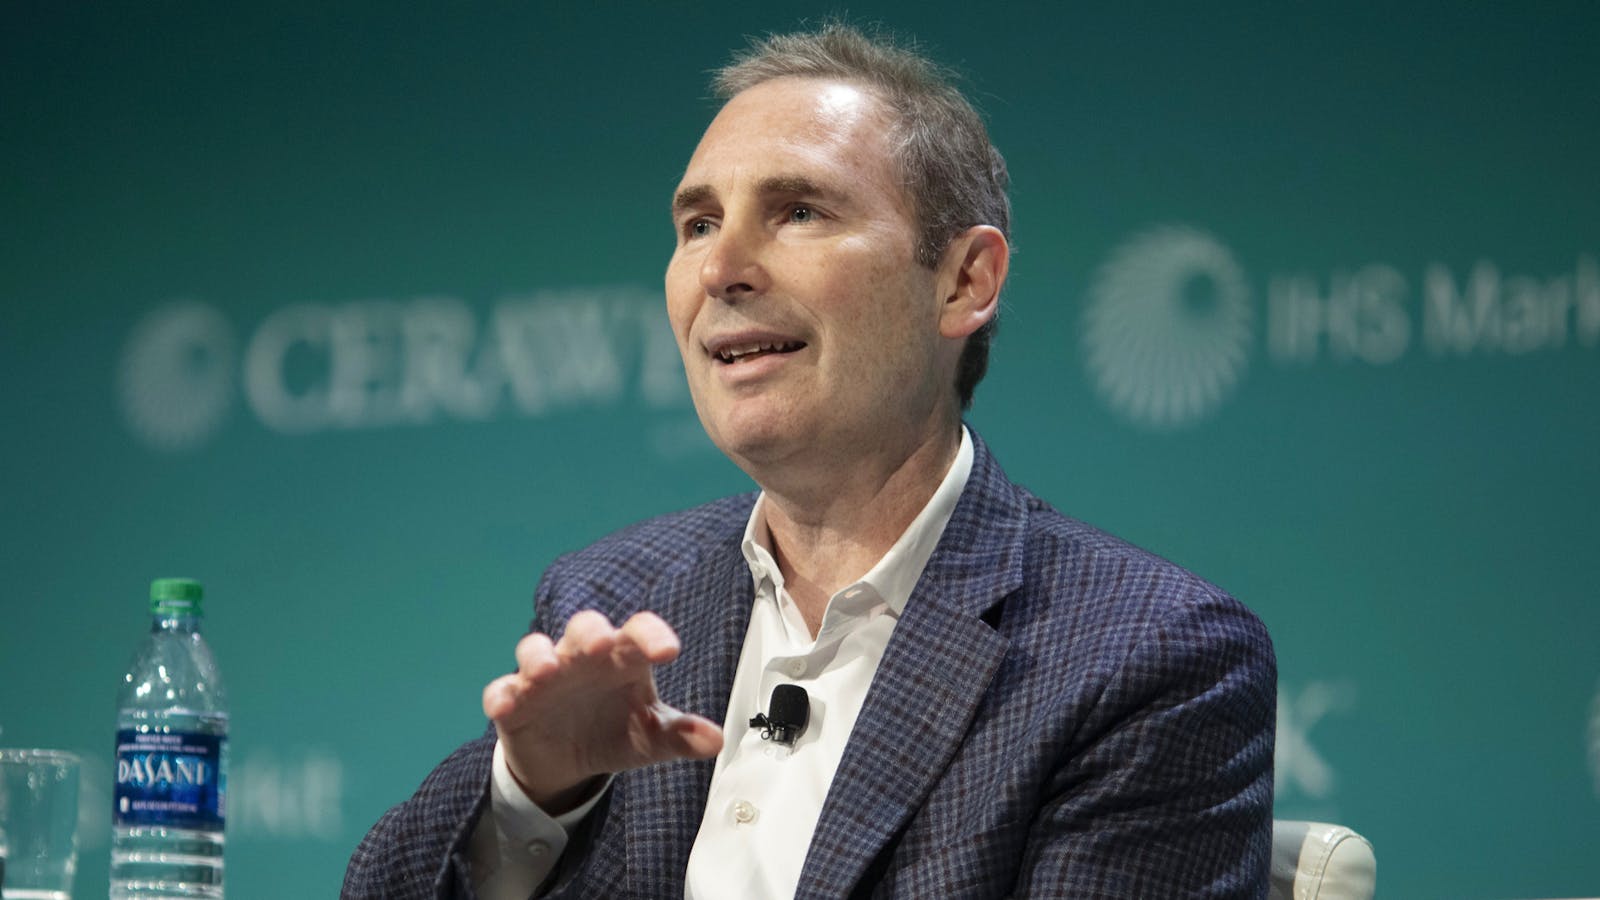 Amazon Web Services CEO Andy Jassy at a conference in March. Photo by Bloomberg